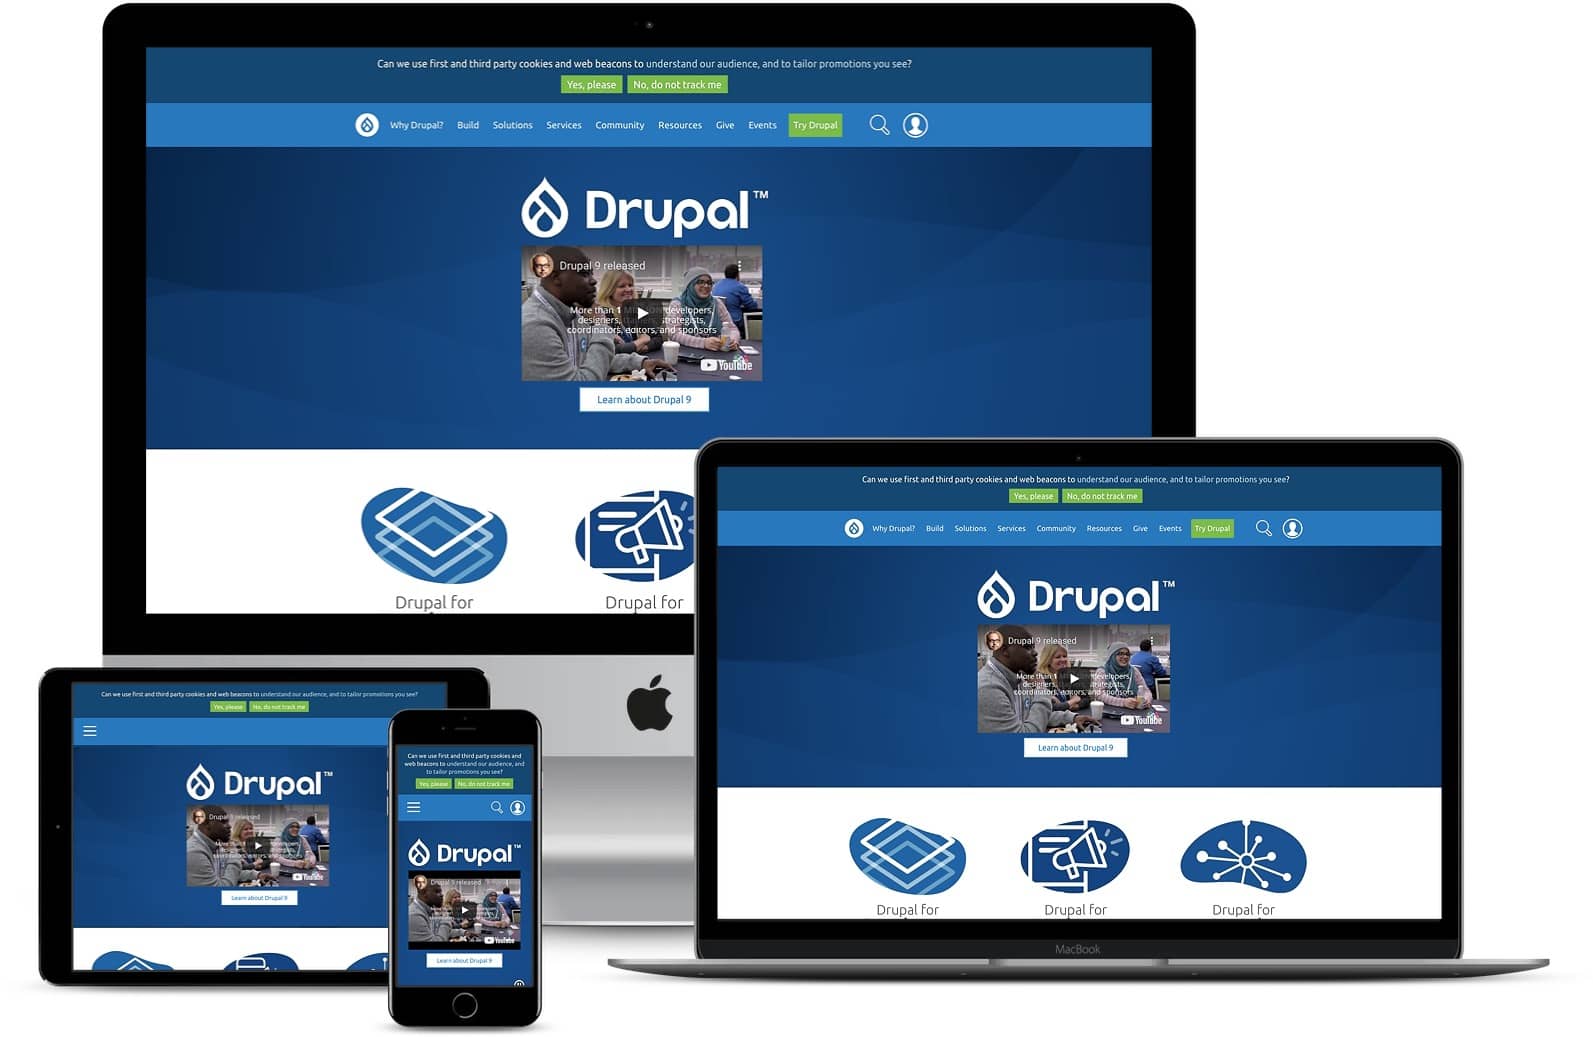 Drupal is considered to be one of the best CMS